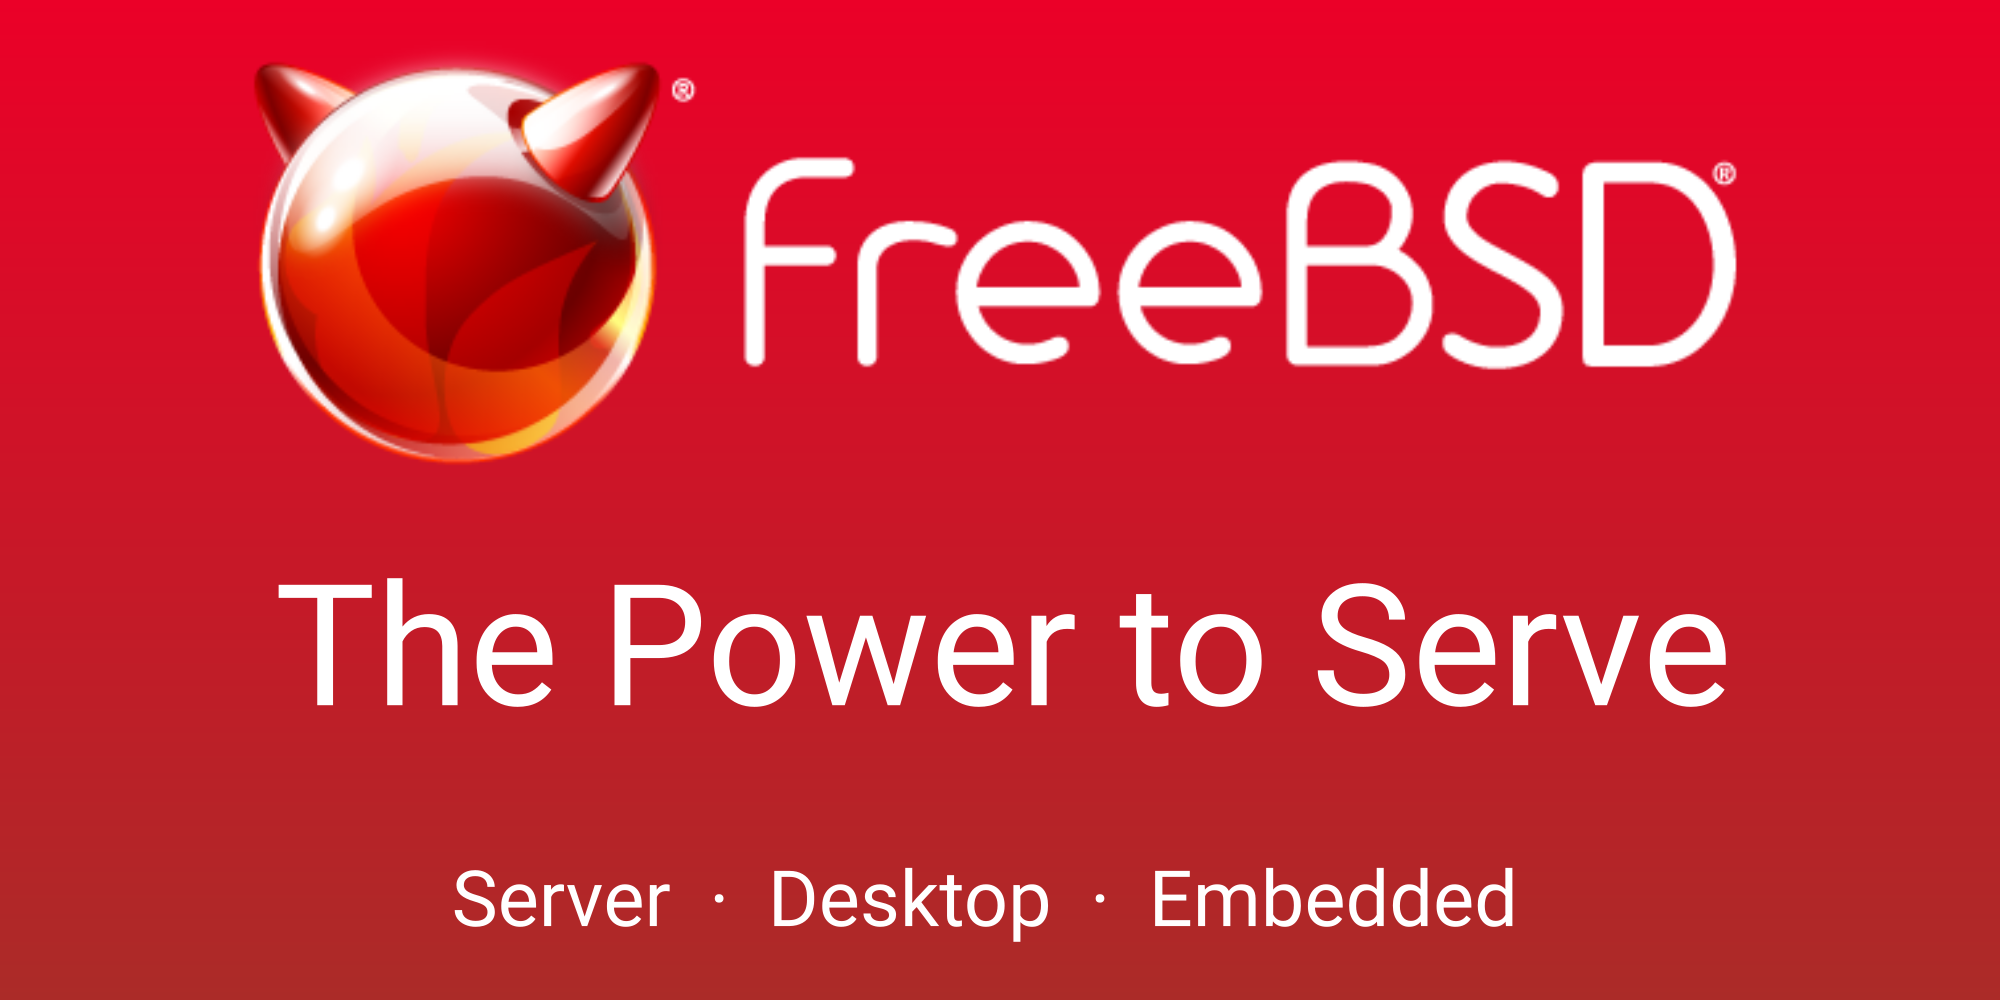 Run your applications with FreeBSD, with upport for desktop, server, appliance, and embedded environments